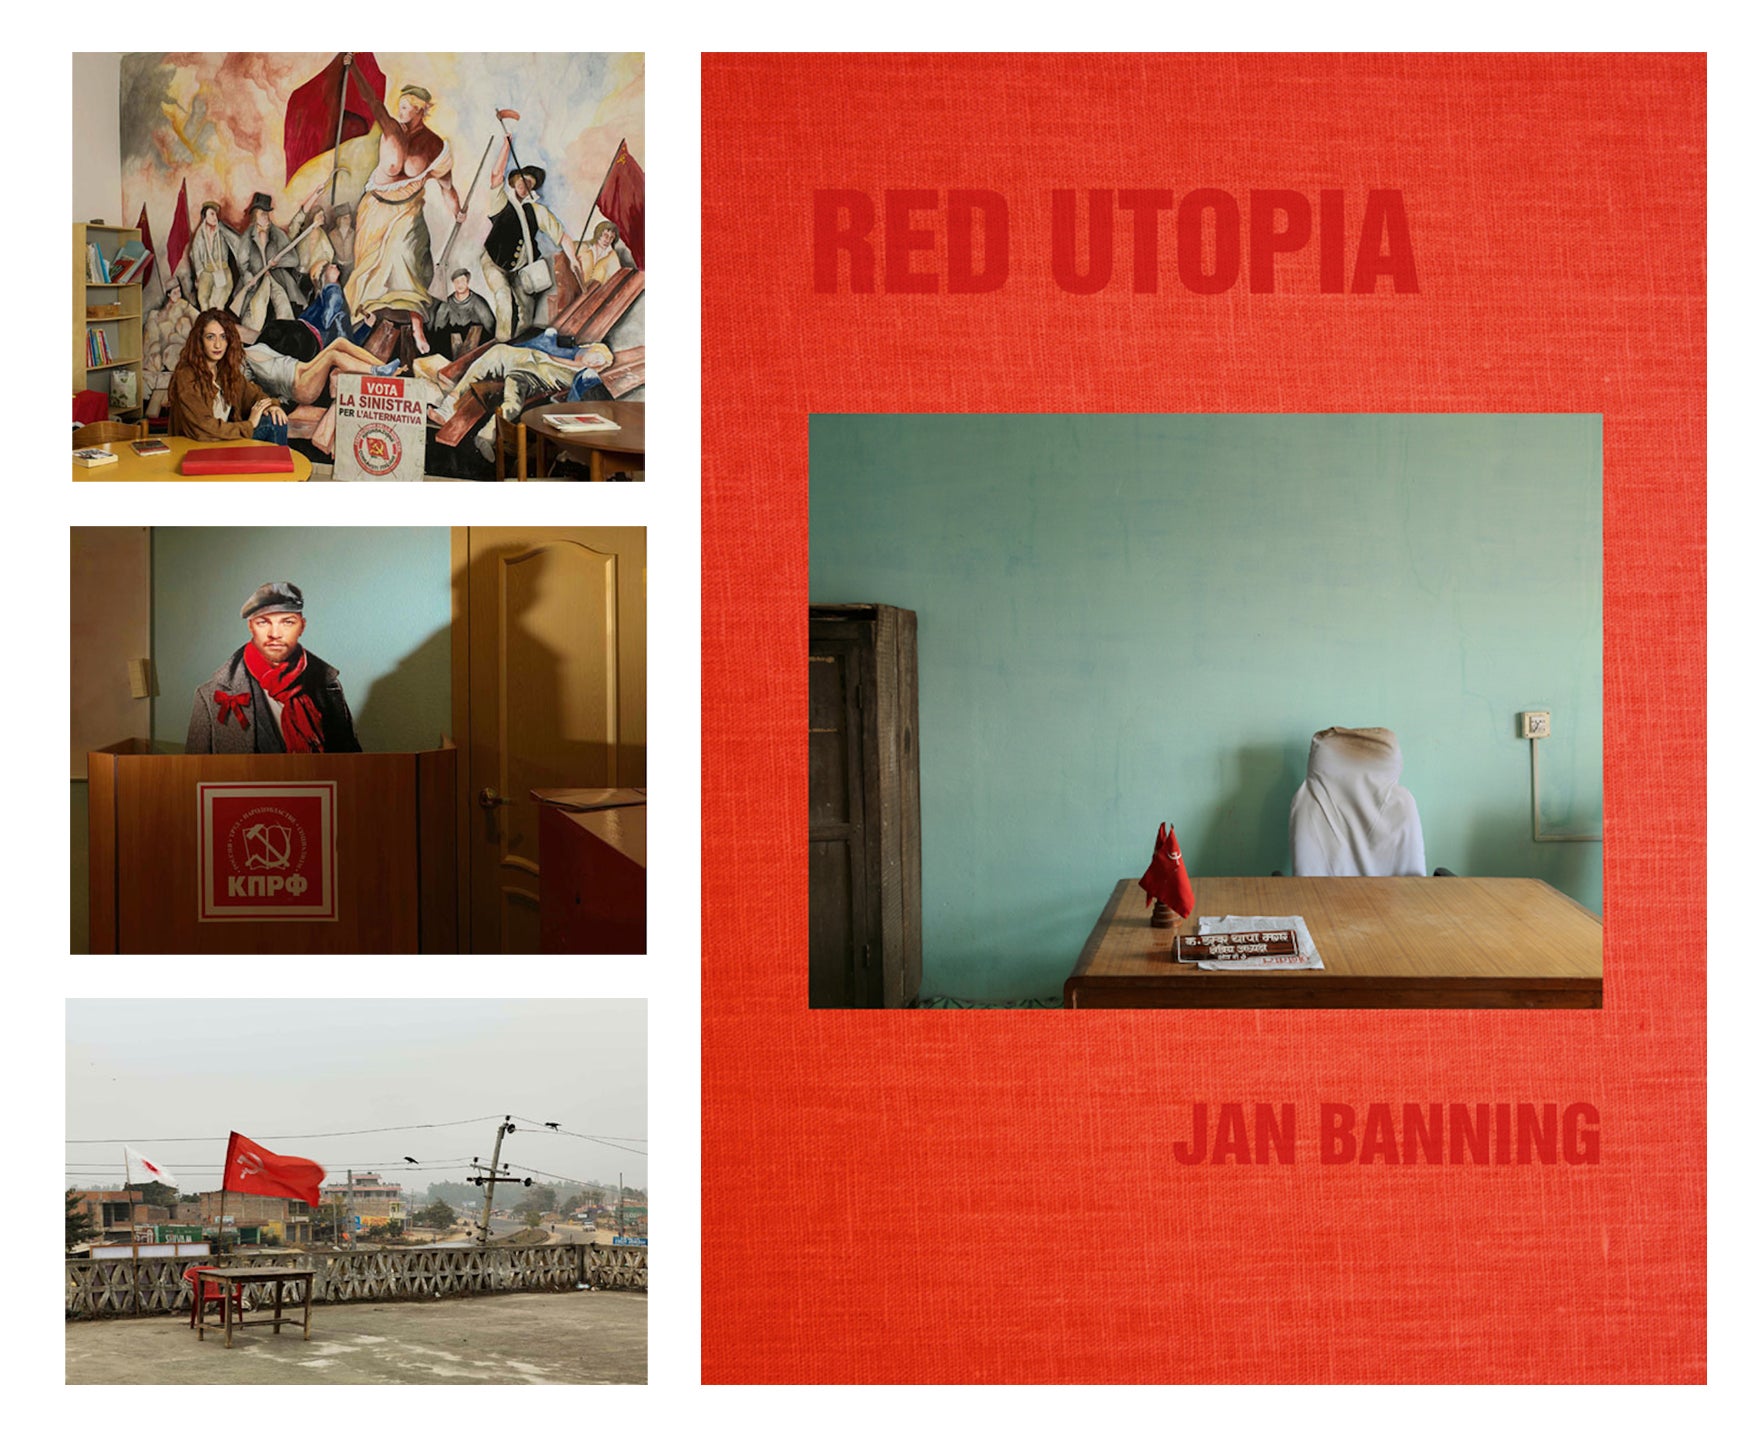 Jan Banning: Red Utopia, Special Limited Edition (with 3 Prints)